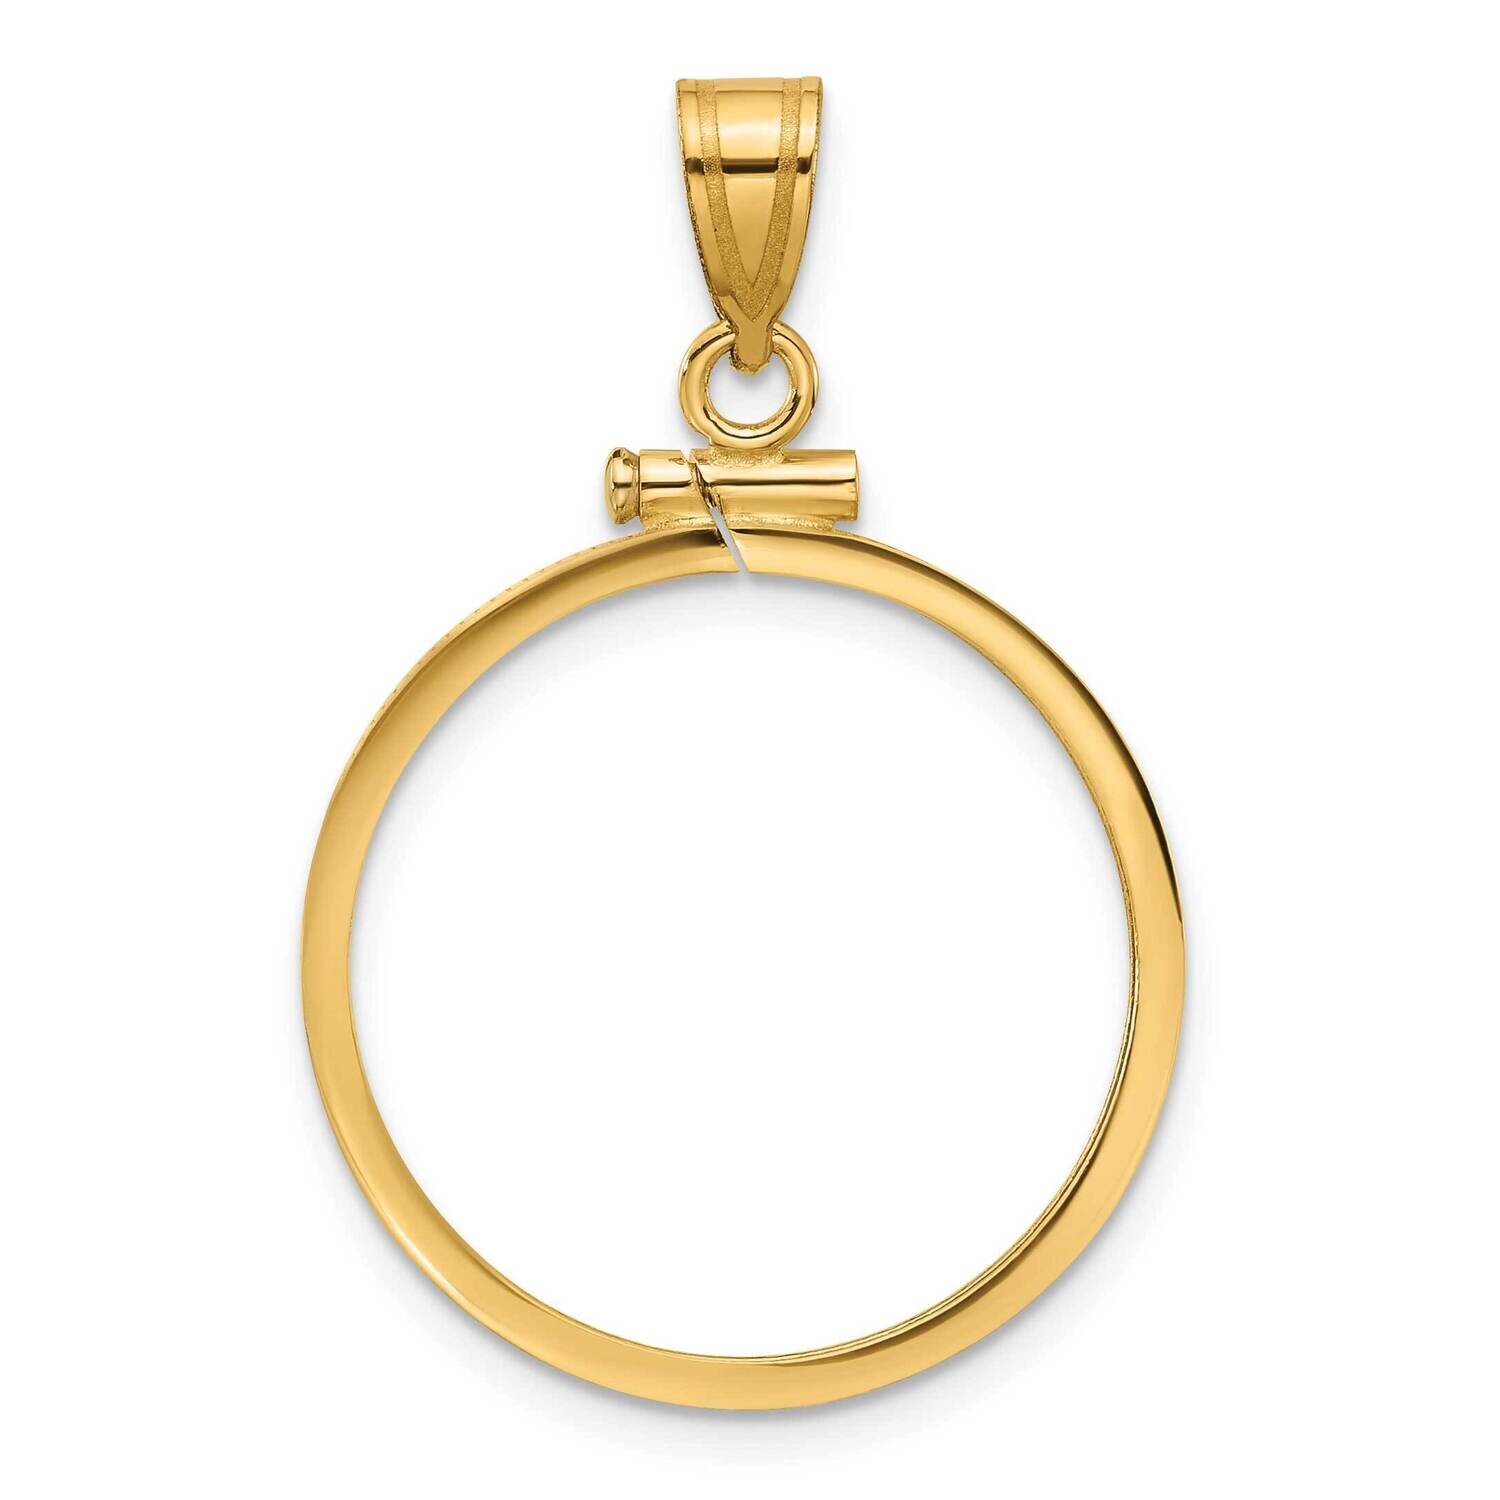 Polished Screw Top 22.0mm X 1.9mm Coin Bezel Pendant 14k Gold C1885/22.0